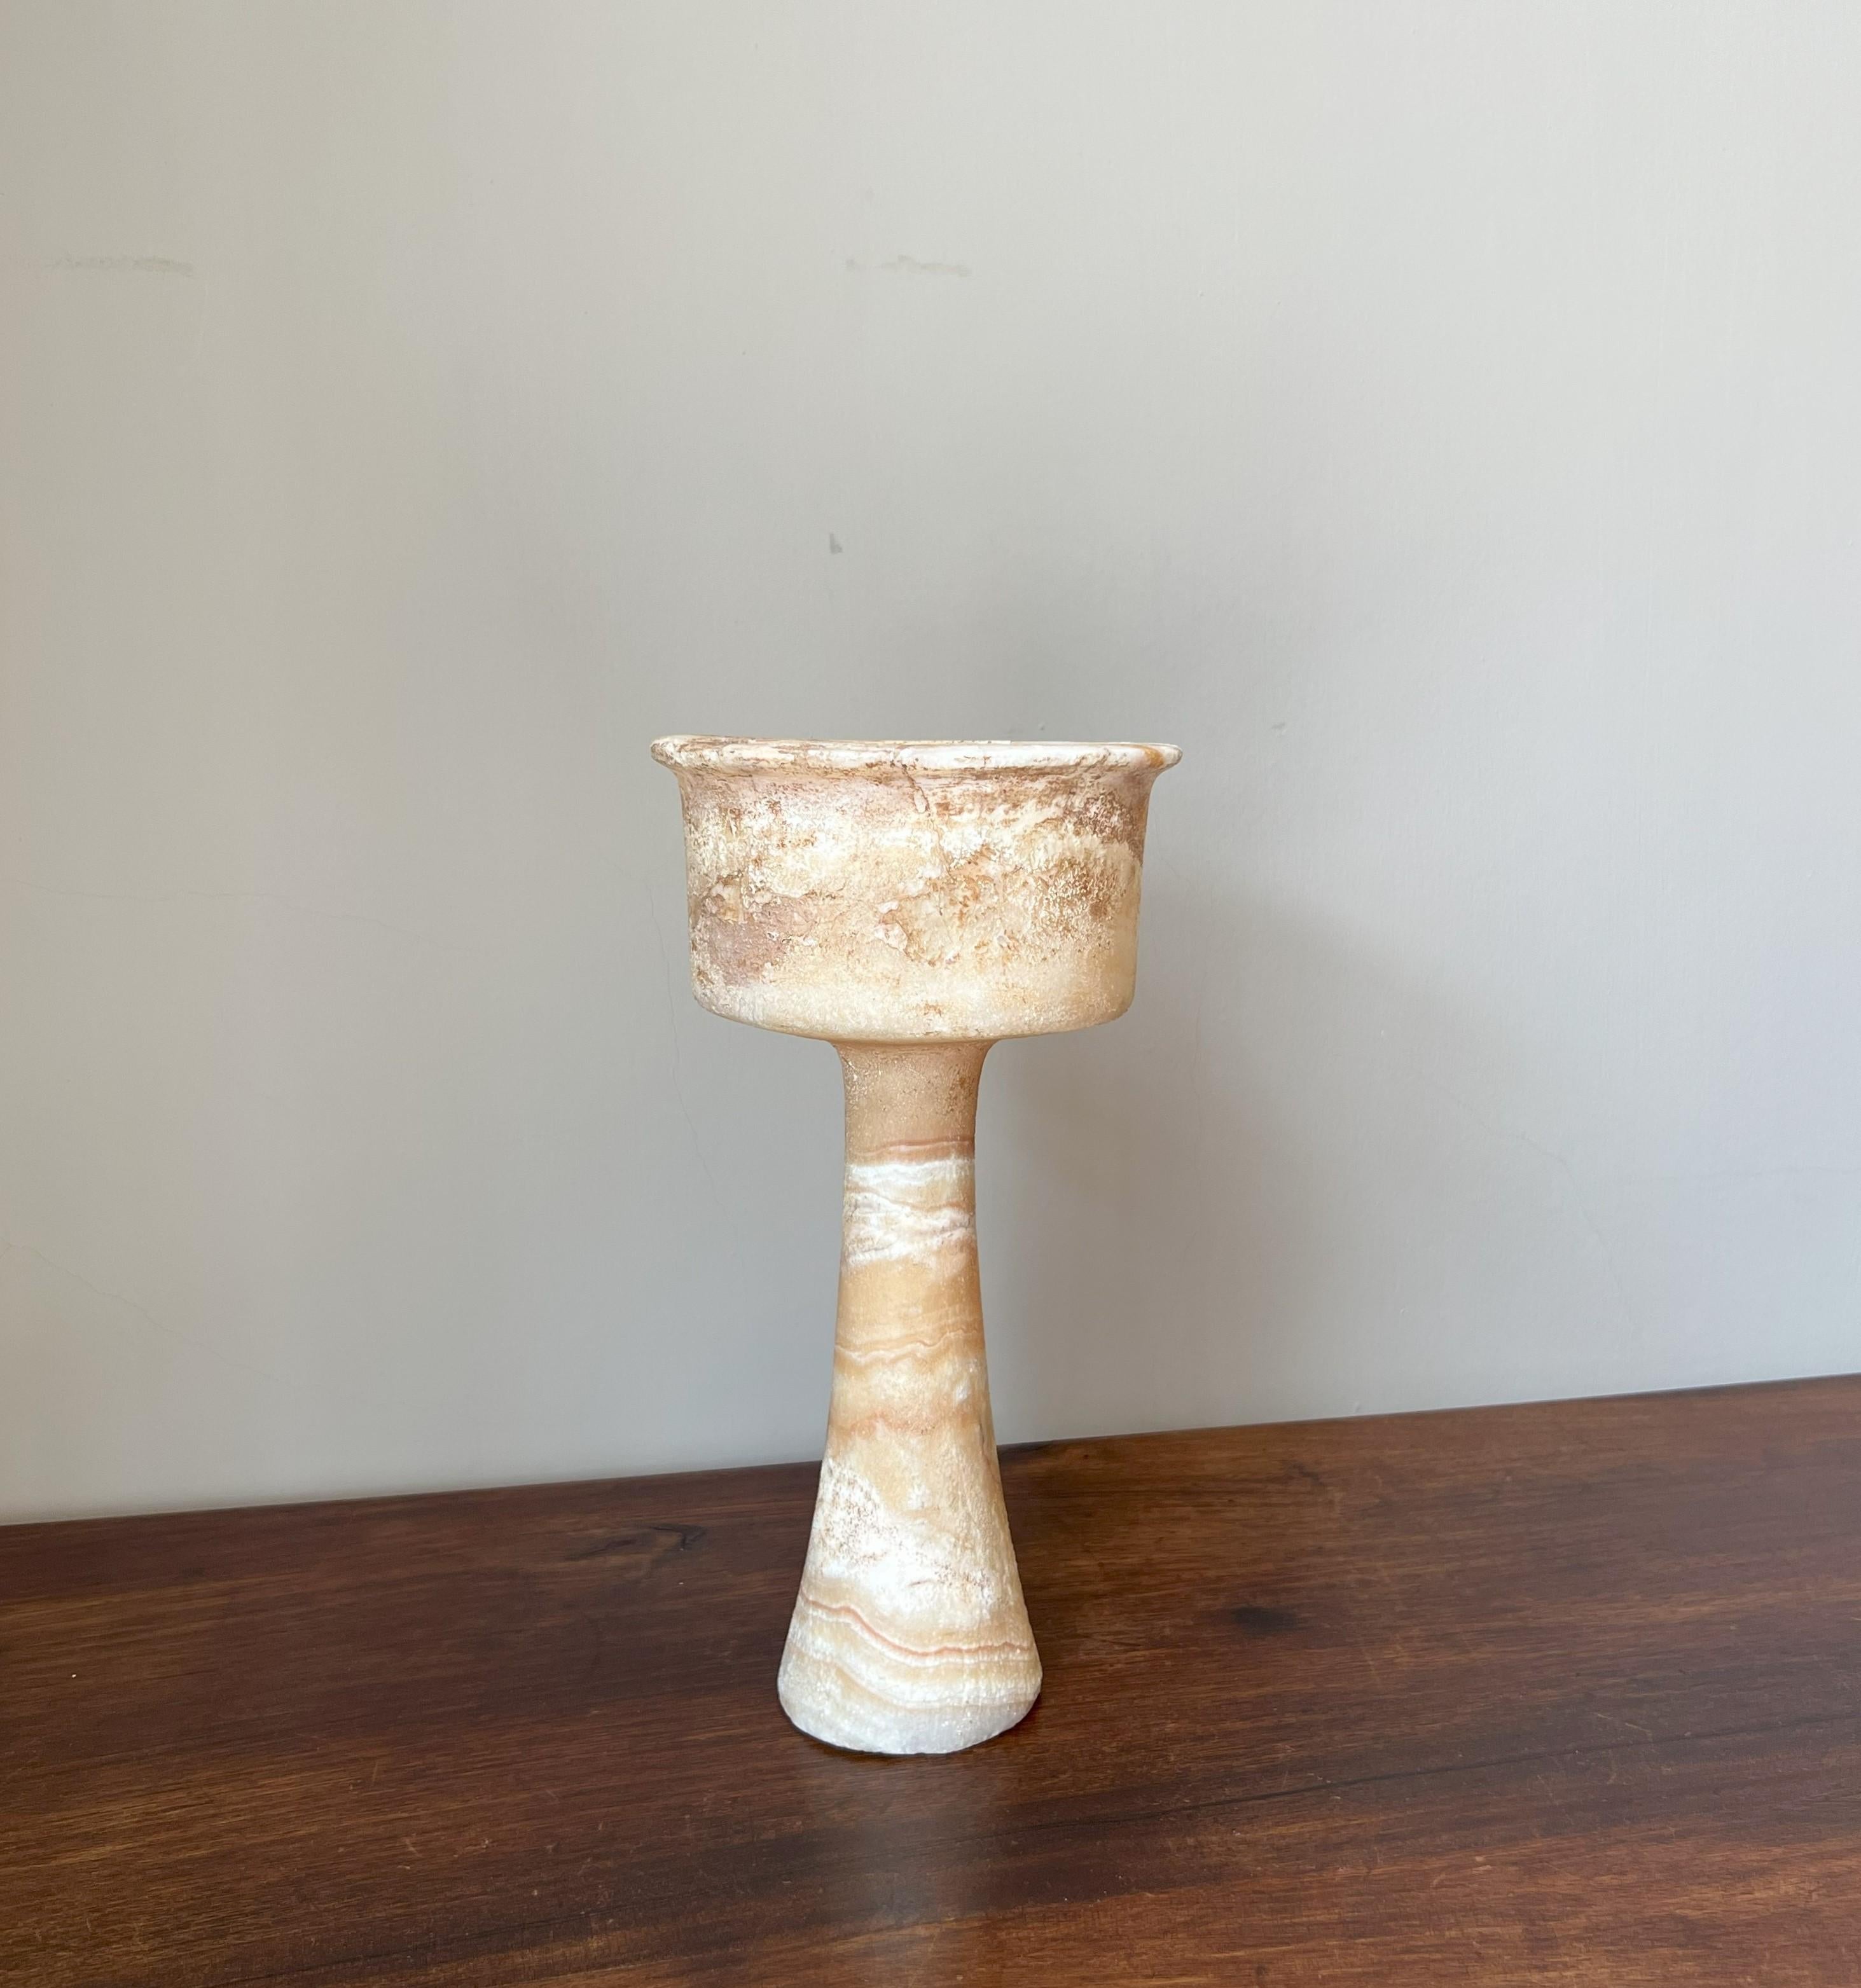 Bactrian alabaster chalice, circa 3000-2000 BC. It has an elegant tapering formed base with a undeep rimmed cup. The alabaster is strikingly vained. There are some old restaurations visible which blend in well. As time and coincidence shaped its